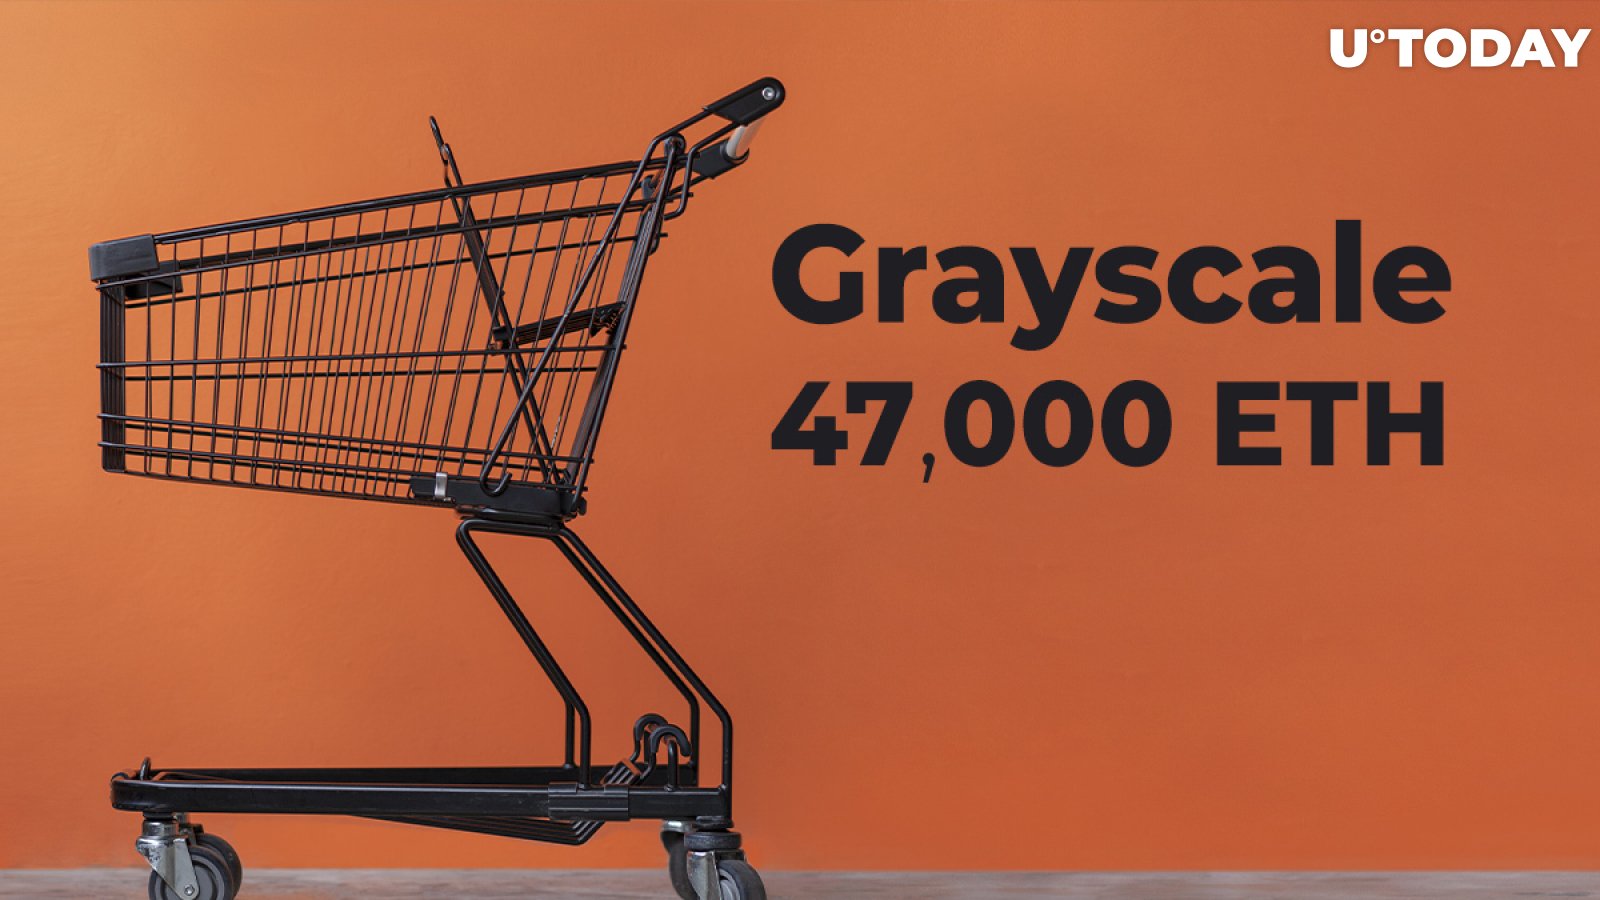 Grayscale Acquired 47,000 ETH Before Ethereum Hit New All-Time High at $1,690